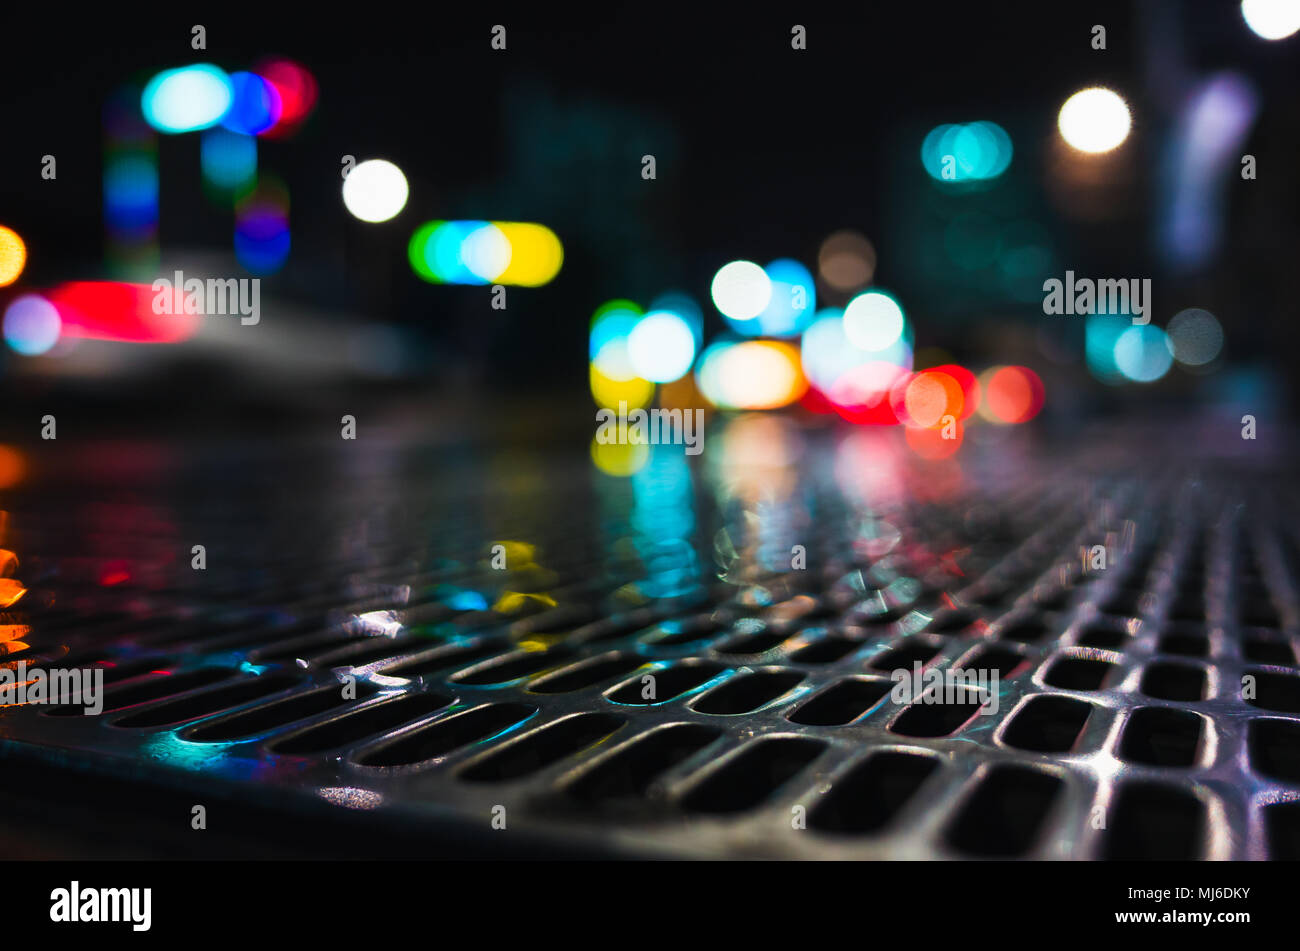 Abstract night city street background, wet sewage grid with colorful blurred lights, natural bokeh effect Stock Photo